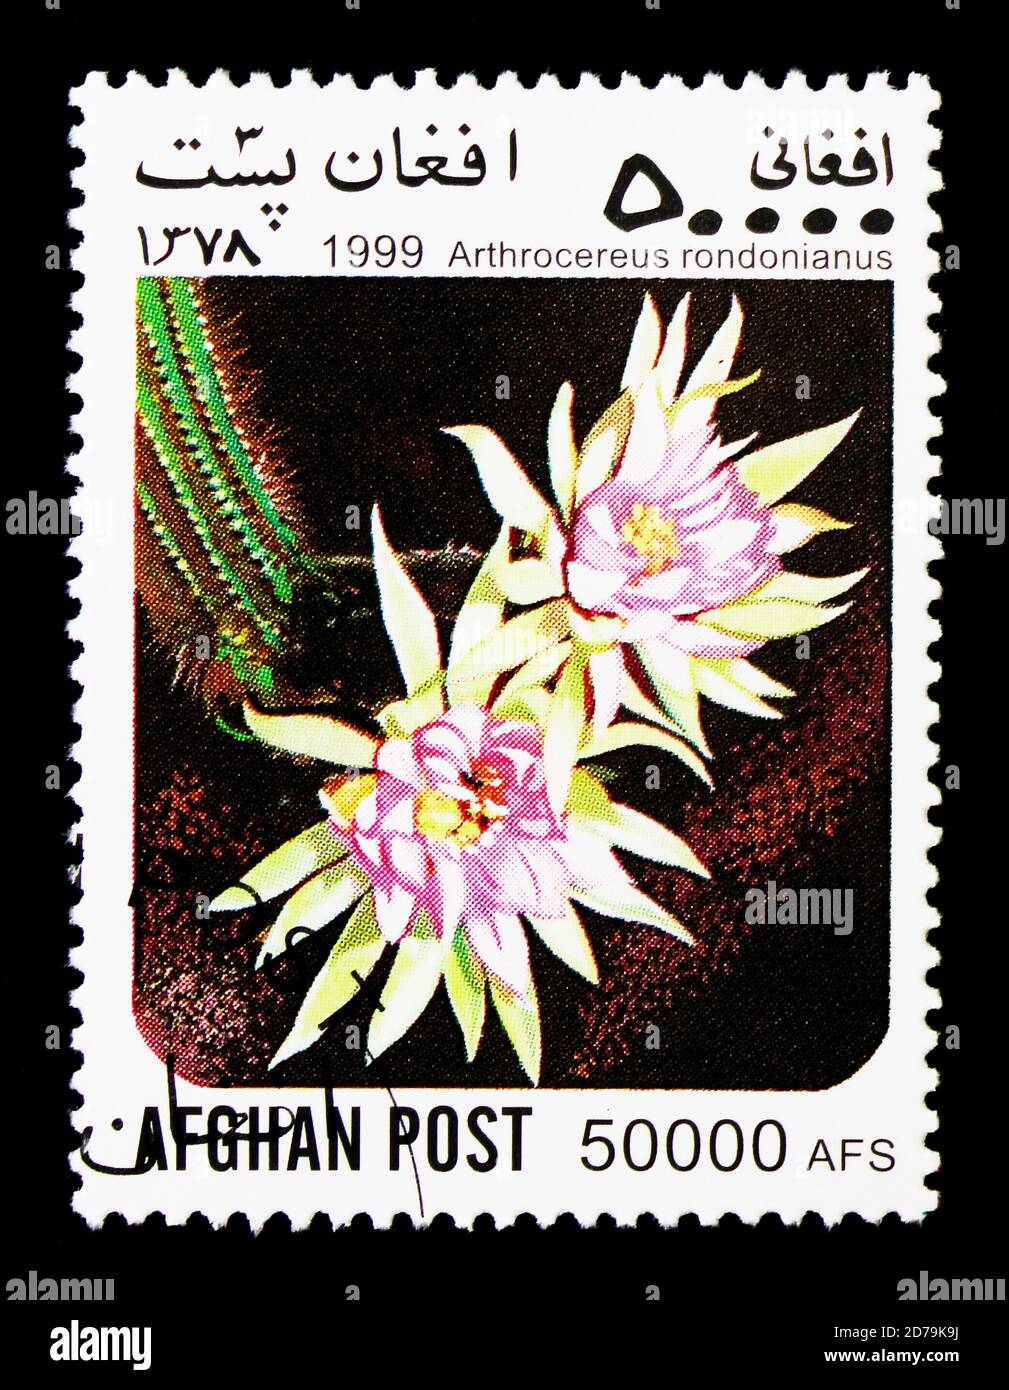 MOSCOW, RUSSIA - DECEMBER 21, 2017: A stamp printed in Afghanistan shows Arthrocereus (Arthrocereus rondonianus), Cacti serie, circa 1999 Stock Photo